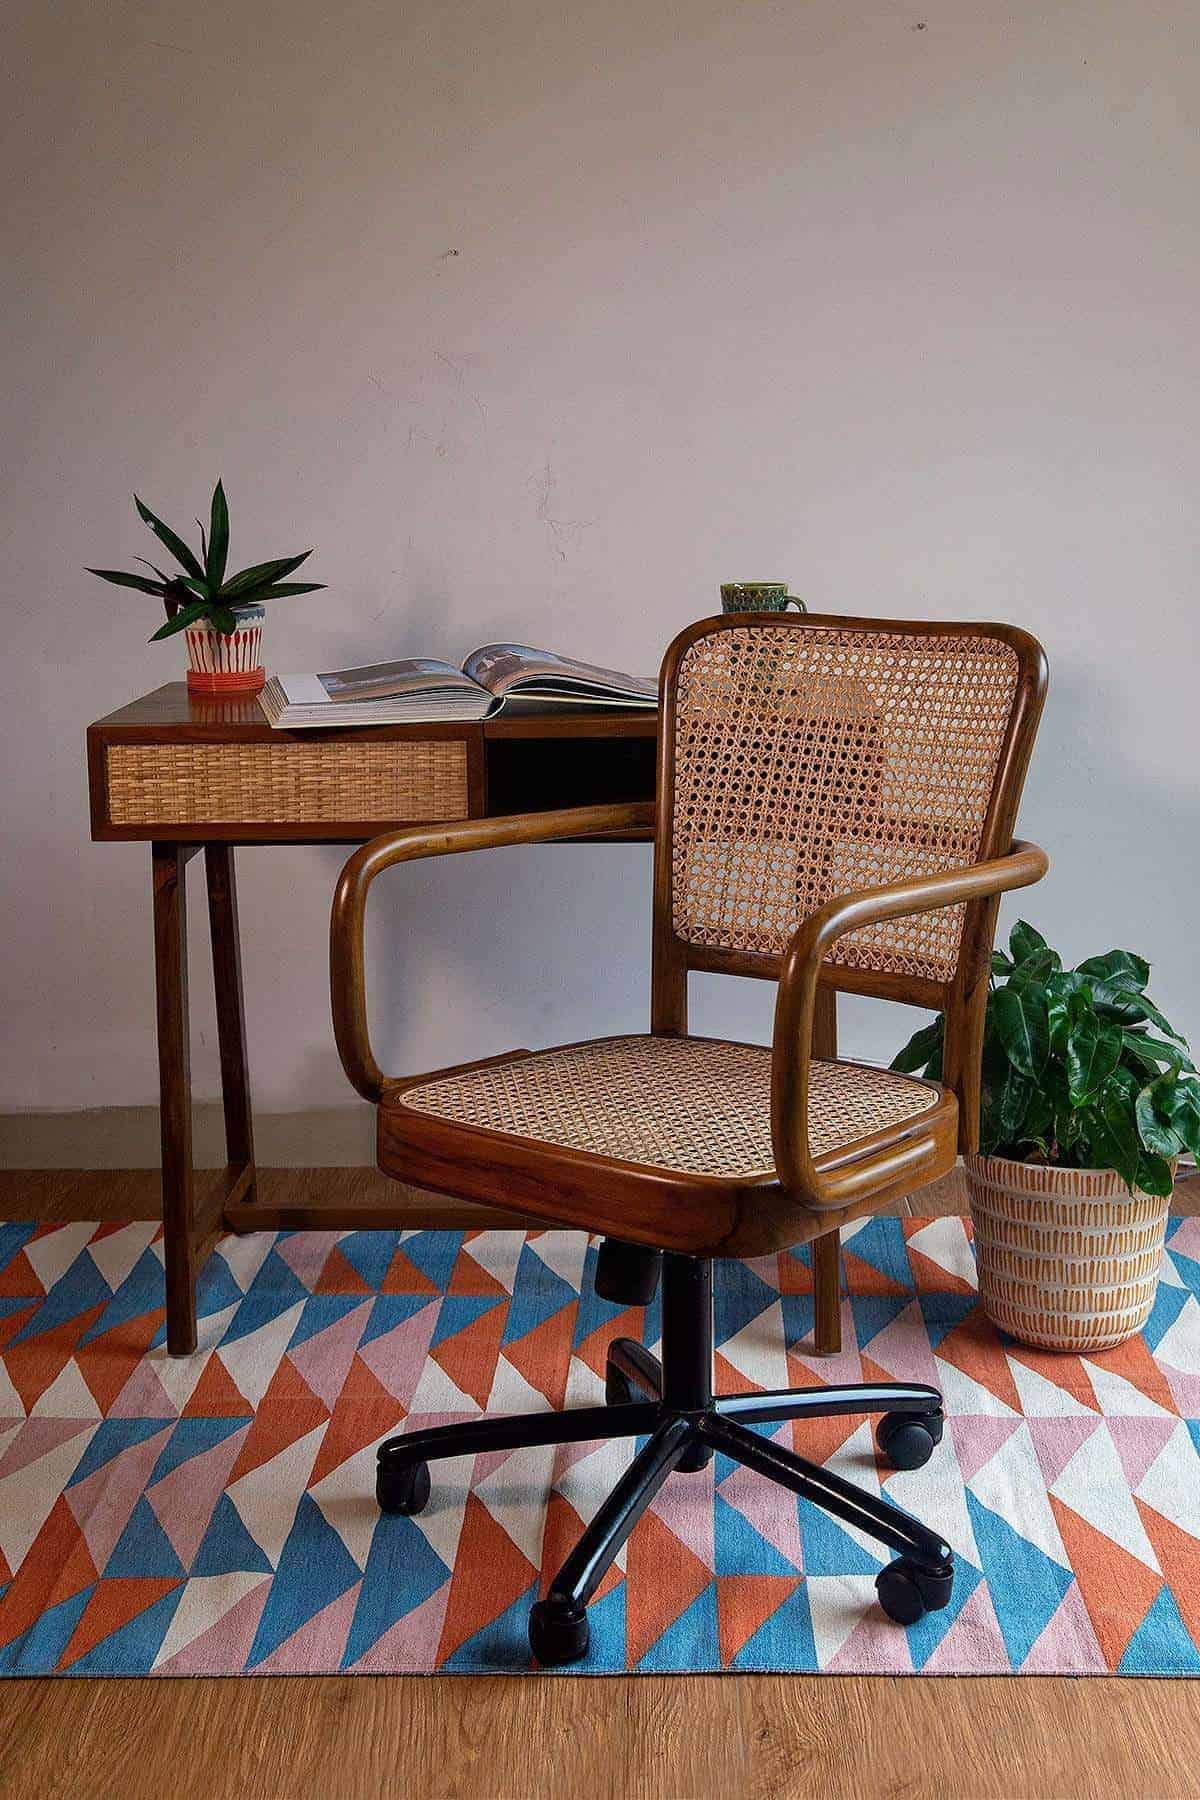 wicker study station with wooden flooring and patterned rug, wood office chair with plastic wheels